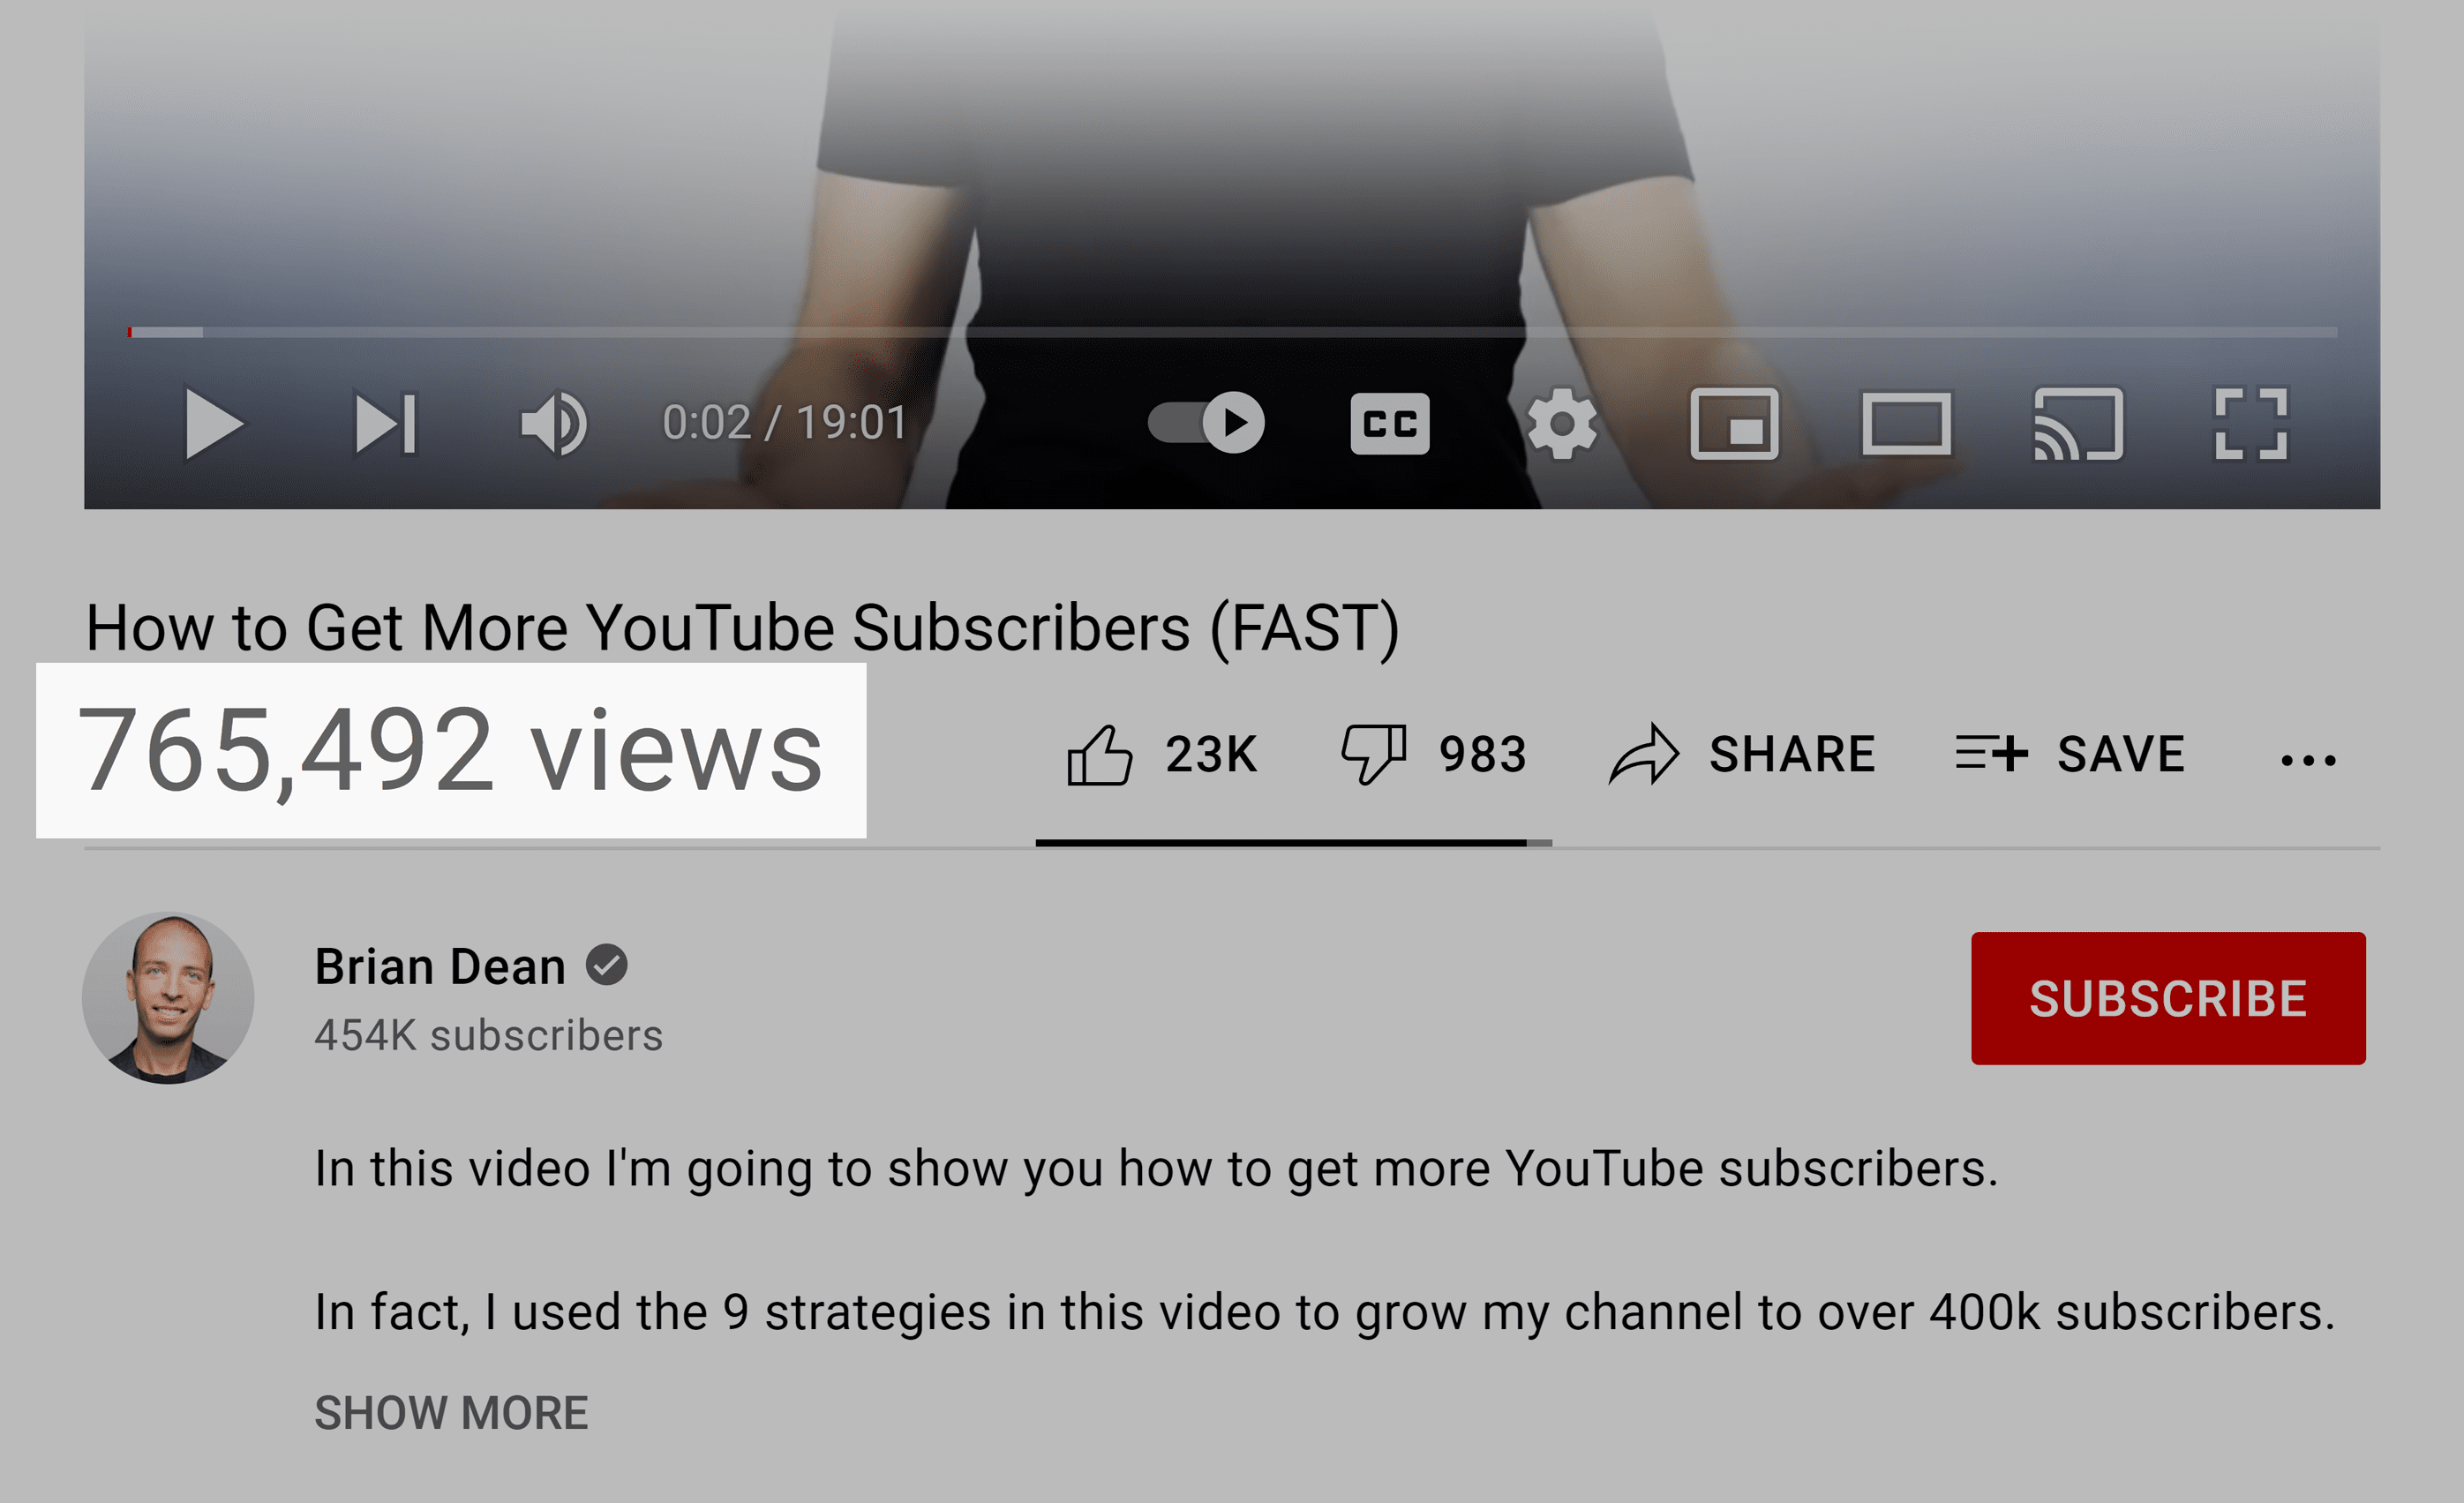 YouTube subscribers – Video views